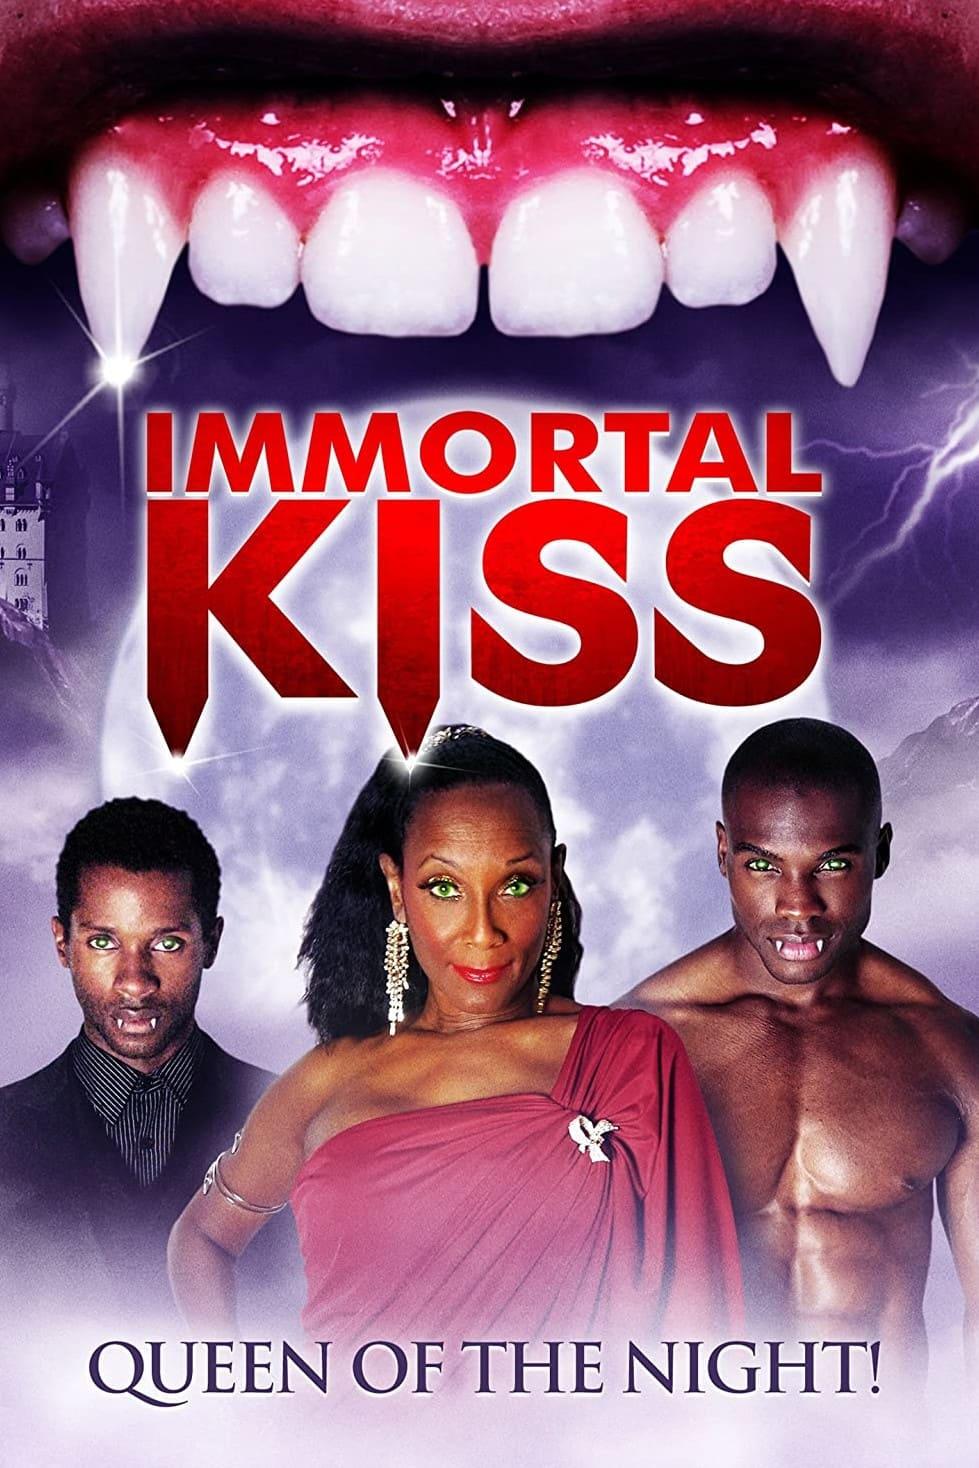 Immortal Kiss: Queen of the Night poster